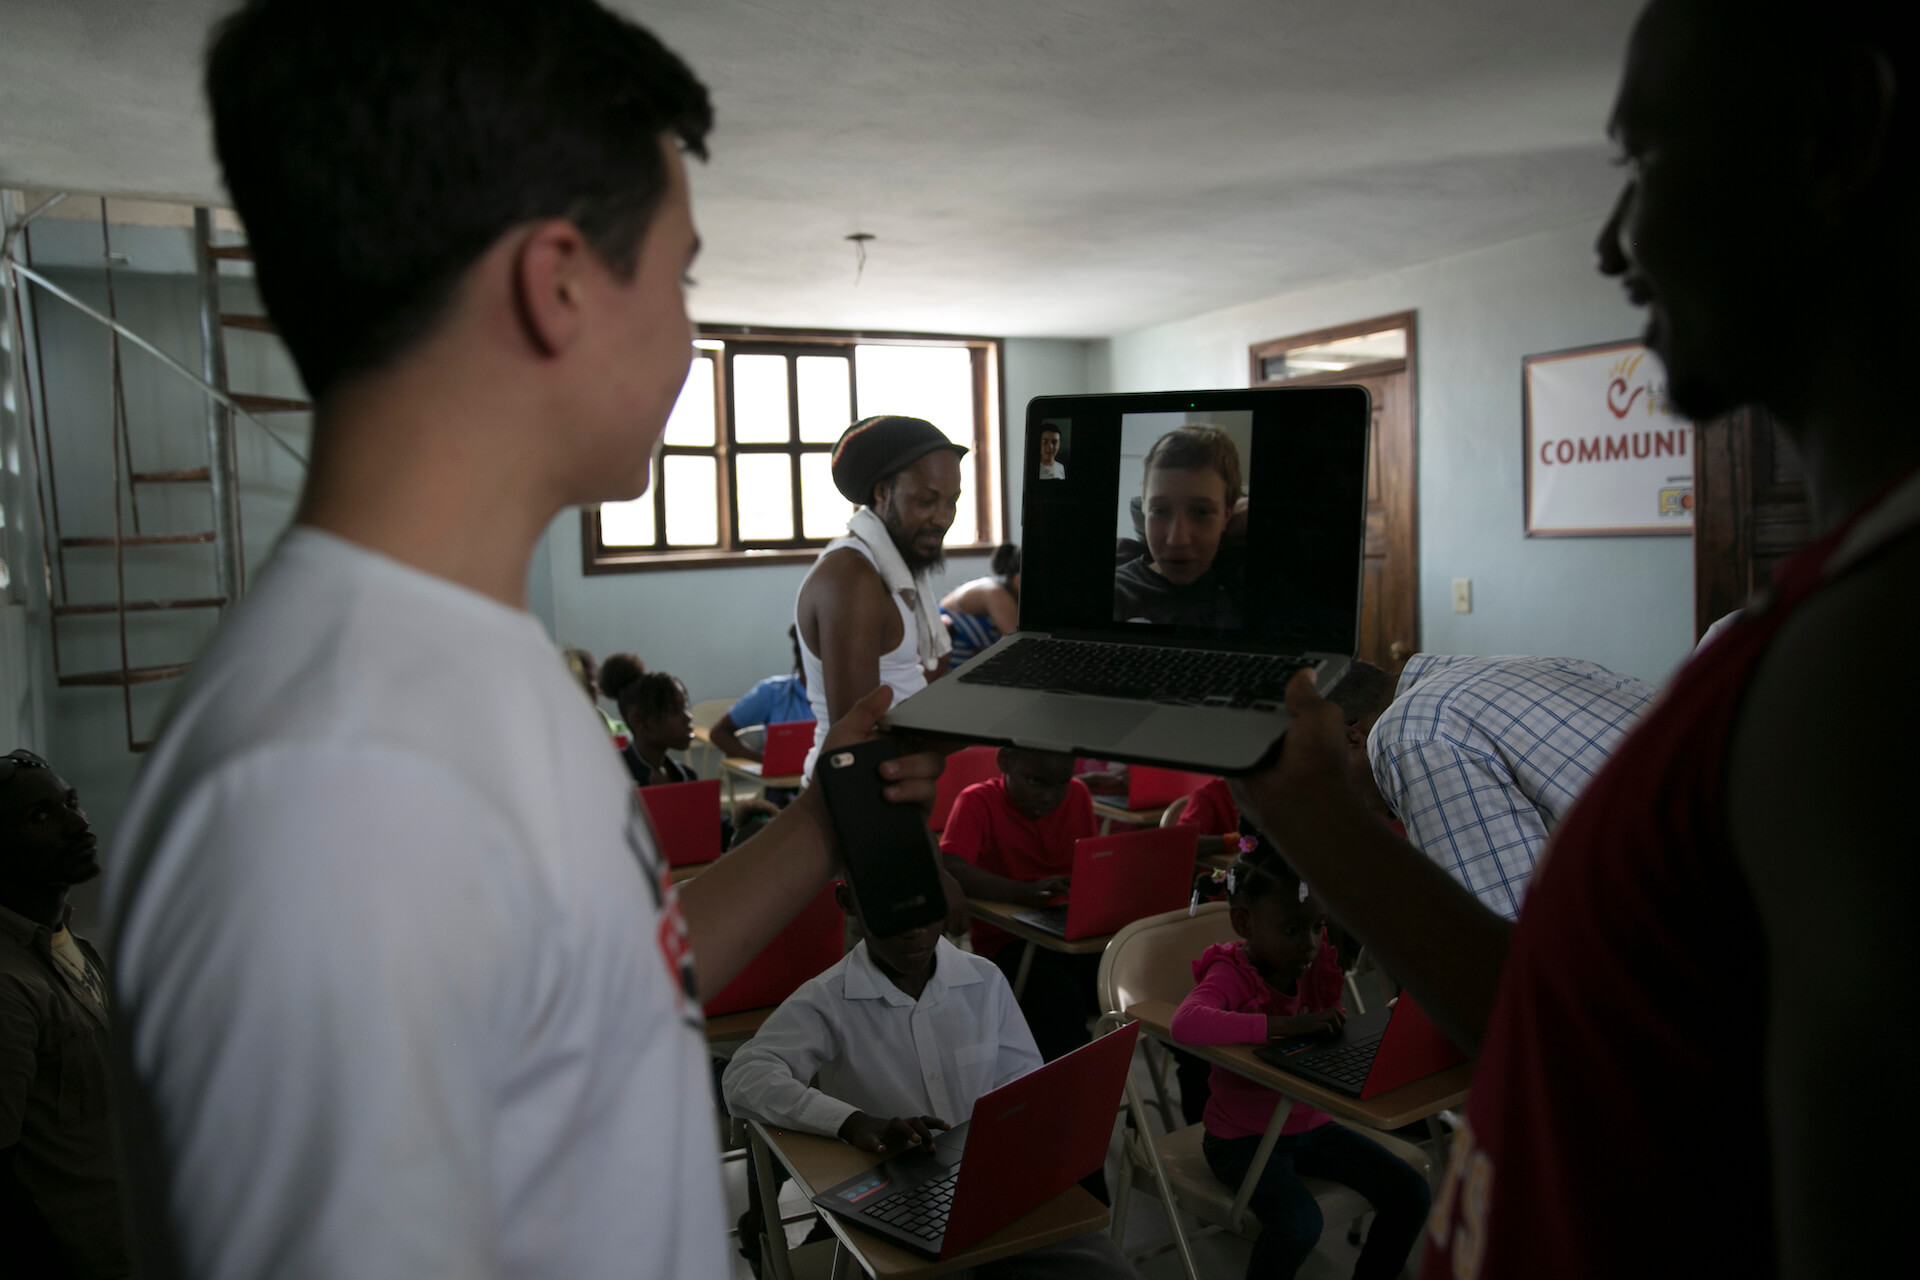 Lorenzo Tobin, one of our A&M Student Atheletes, leads a Skype call between some of our sponsored students in Haiti and our student atheletes in New York. They got to meet each other and ask quesionts about their lives, 